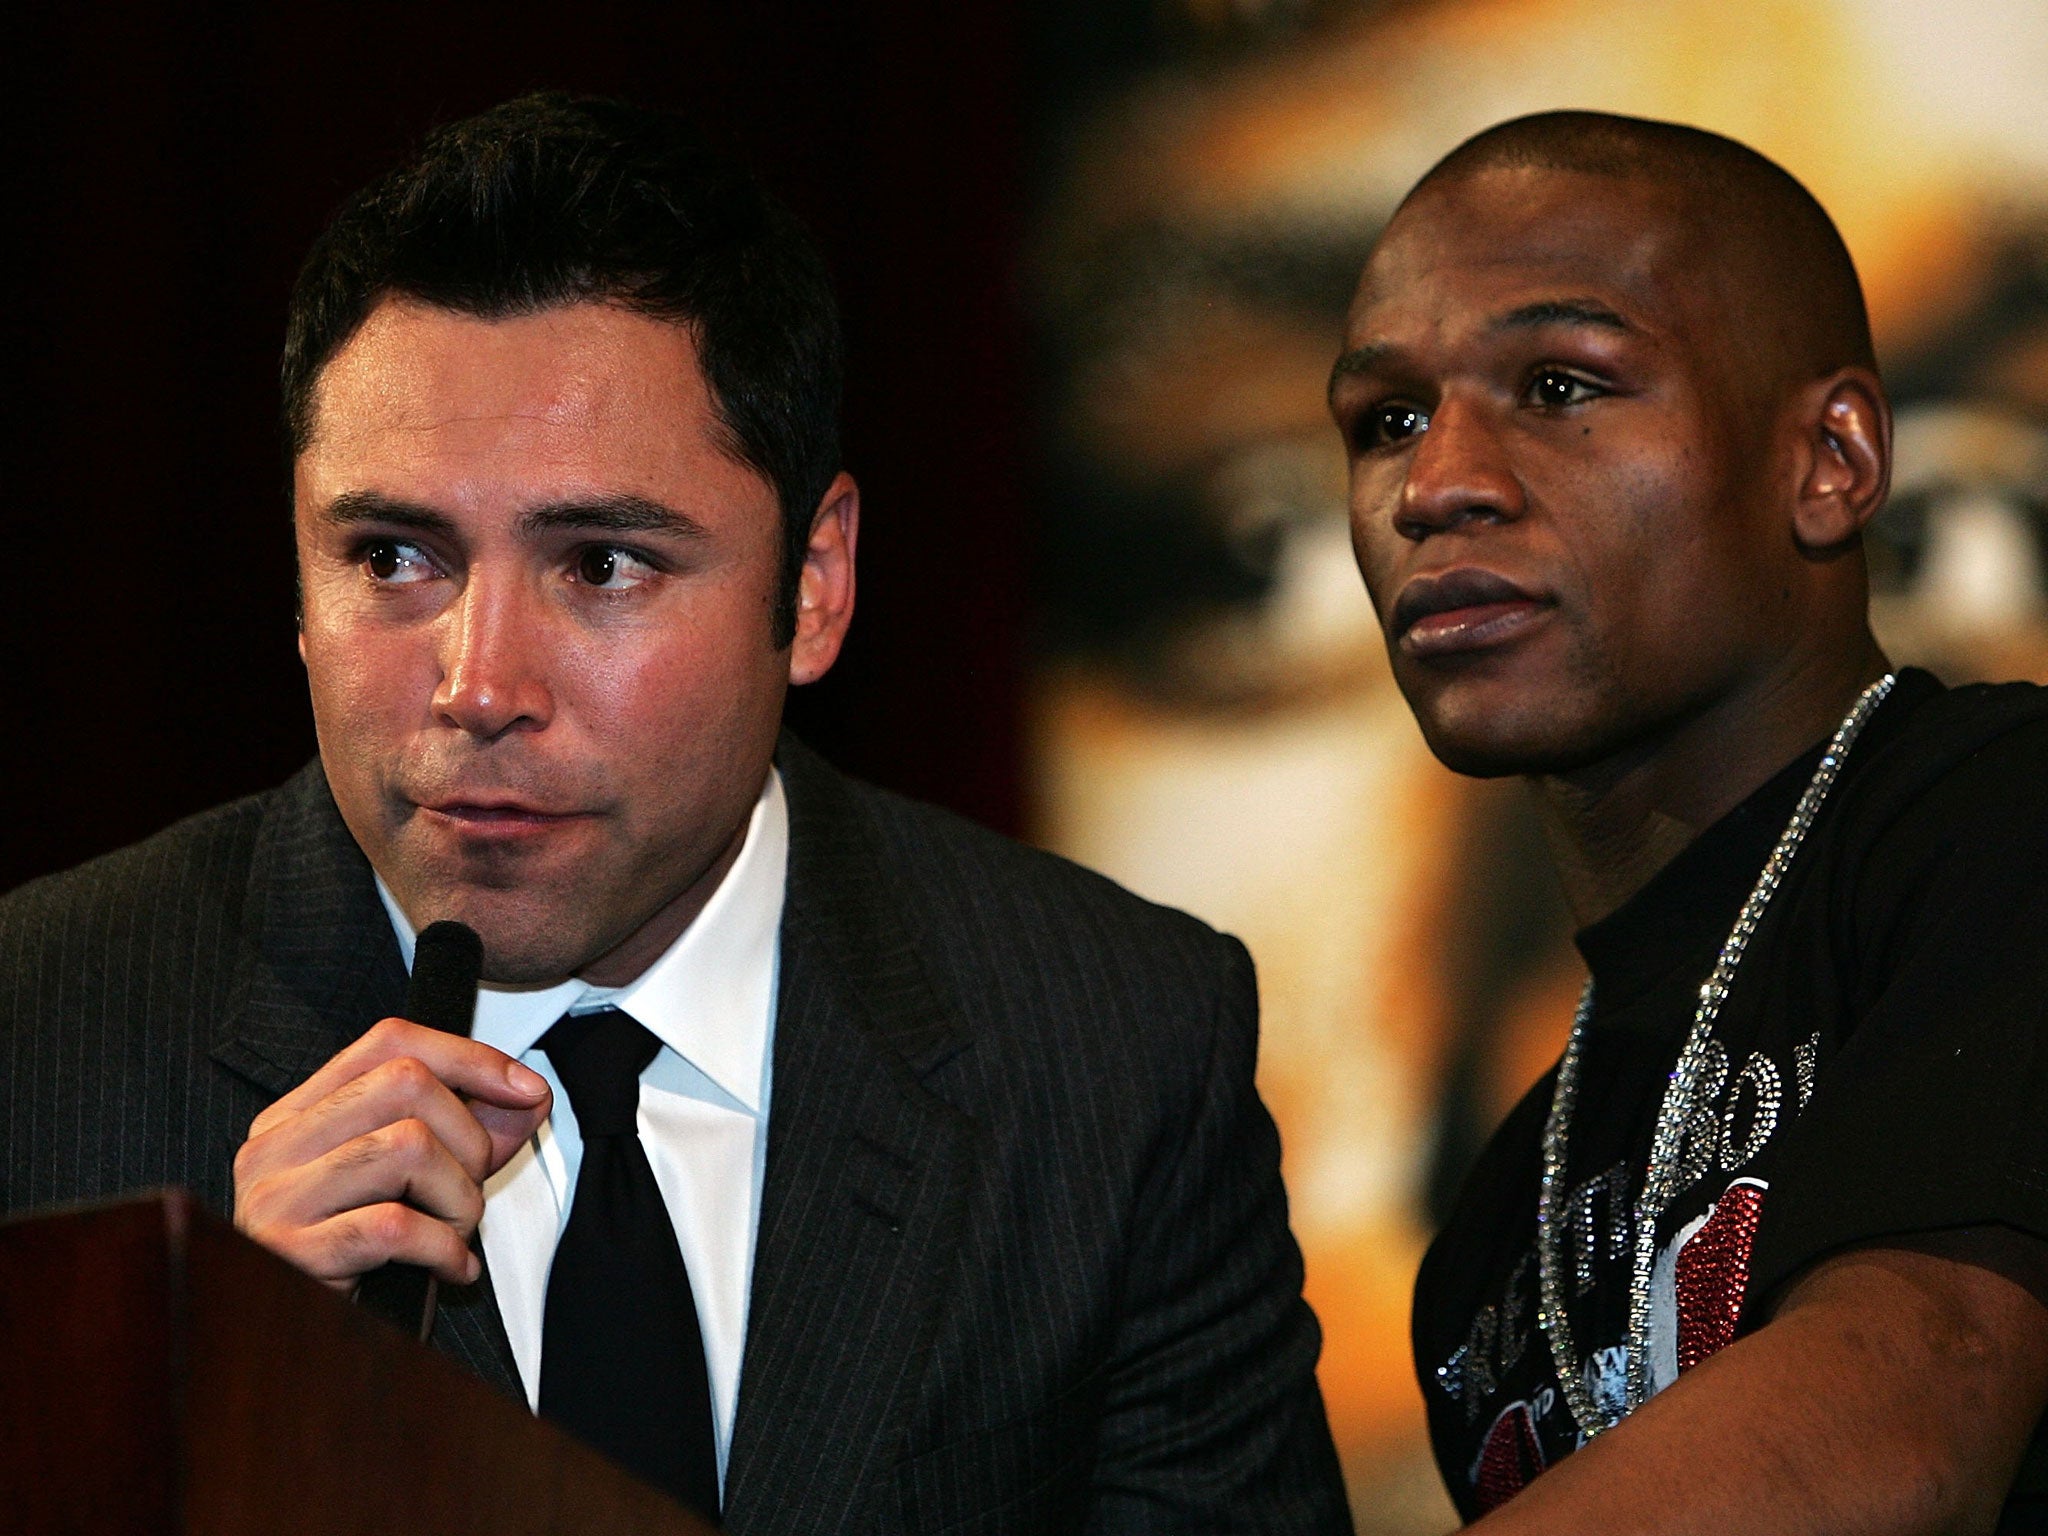 Oscar De La Hoya and Floyd Mayweather after the latters victory over Ricky Hatton